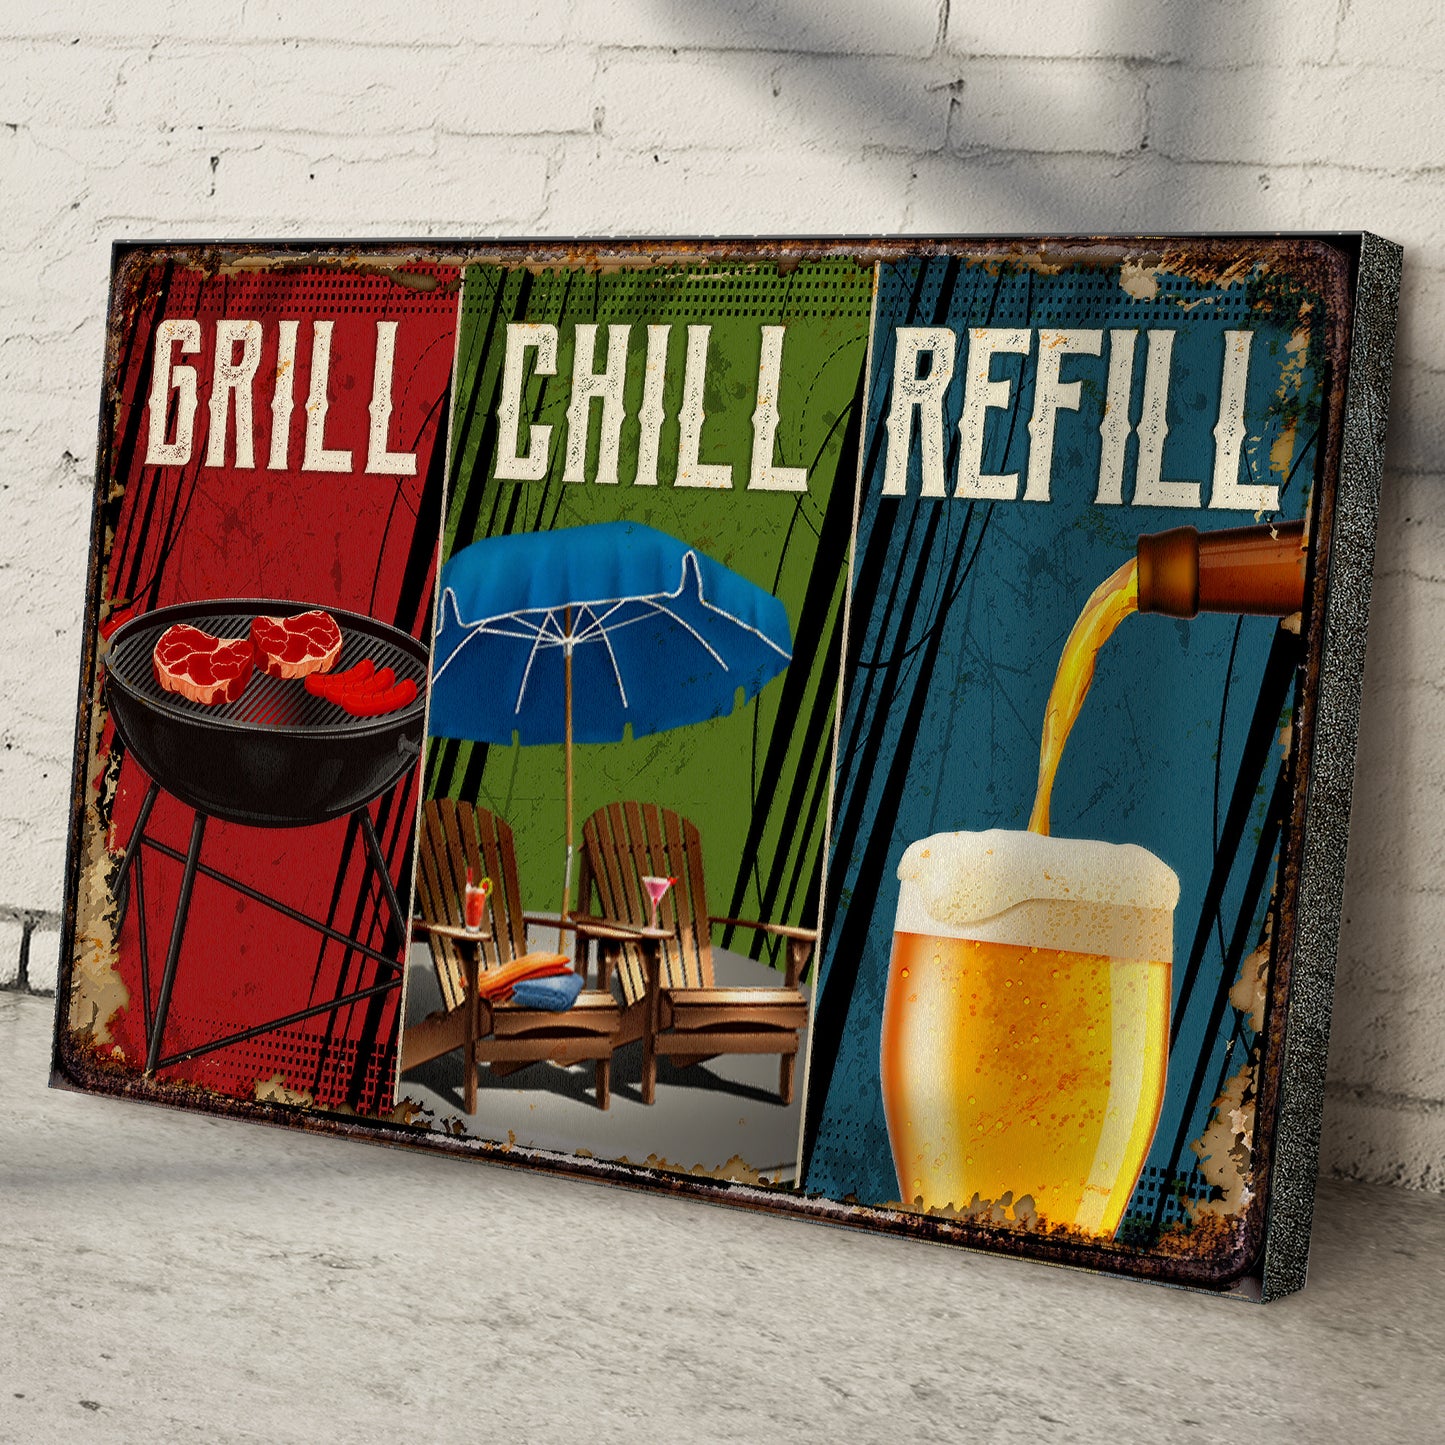 Grill Chill Refill Sign Style 1 - Image by Tailored Canvases